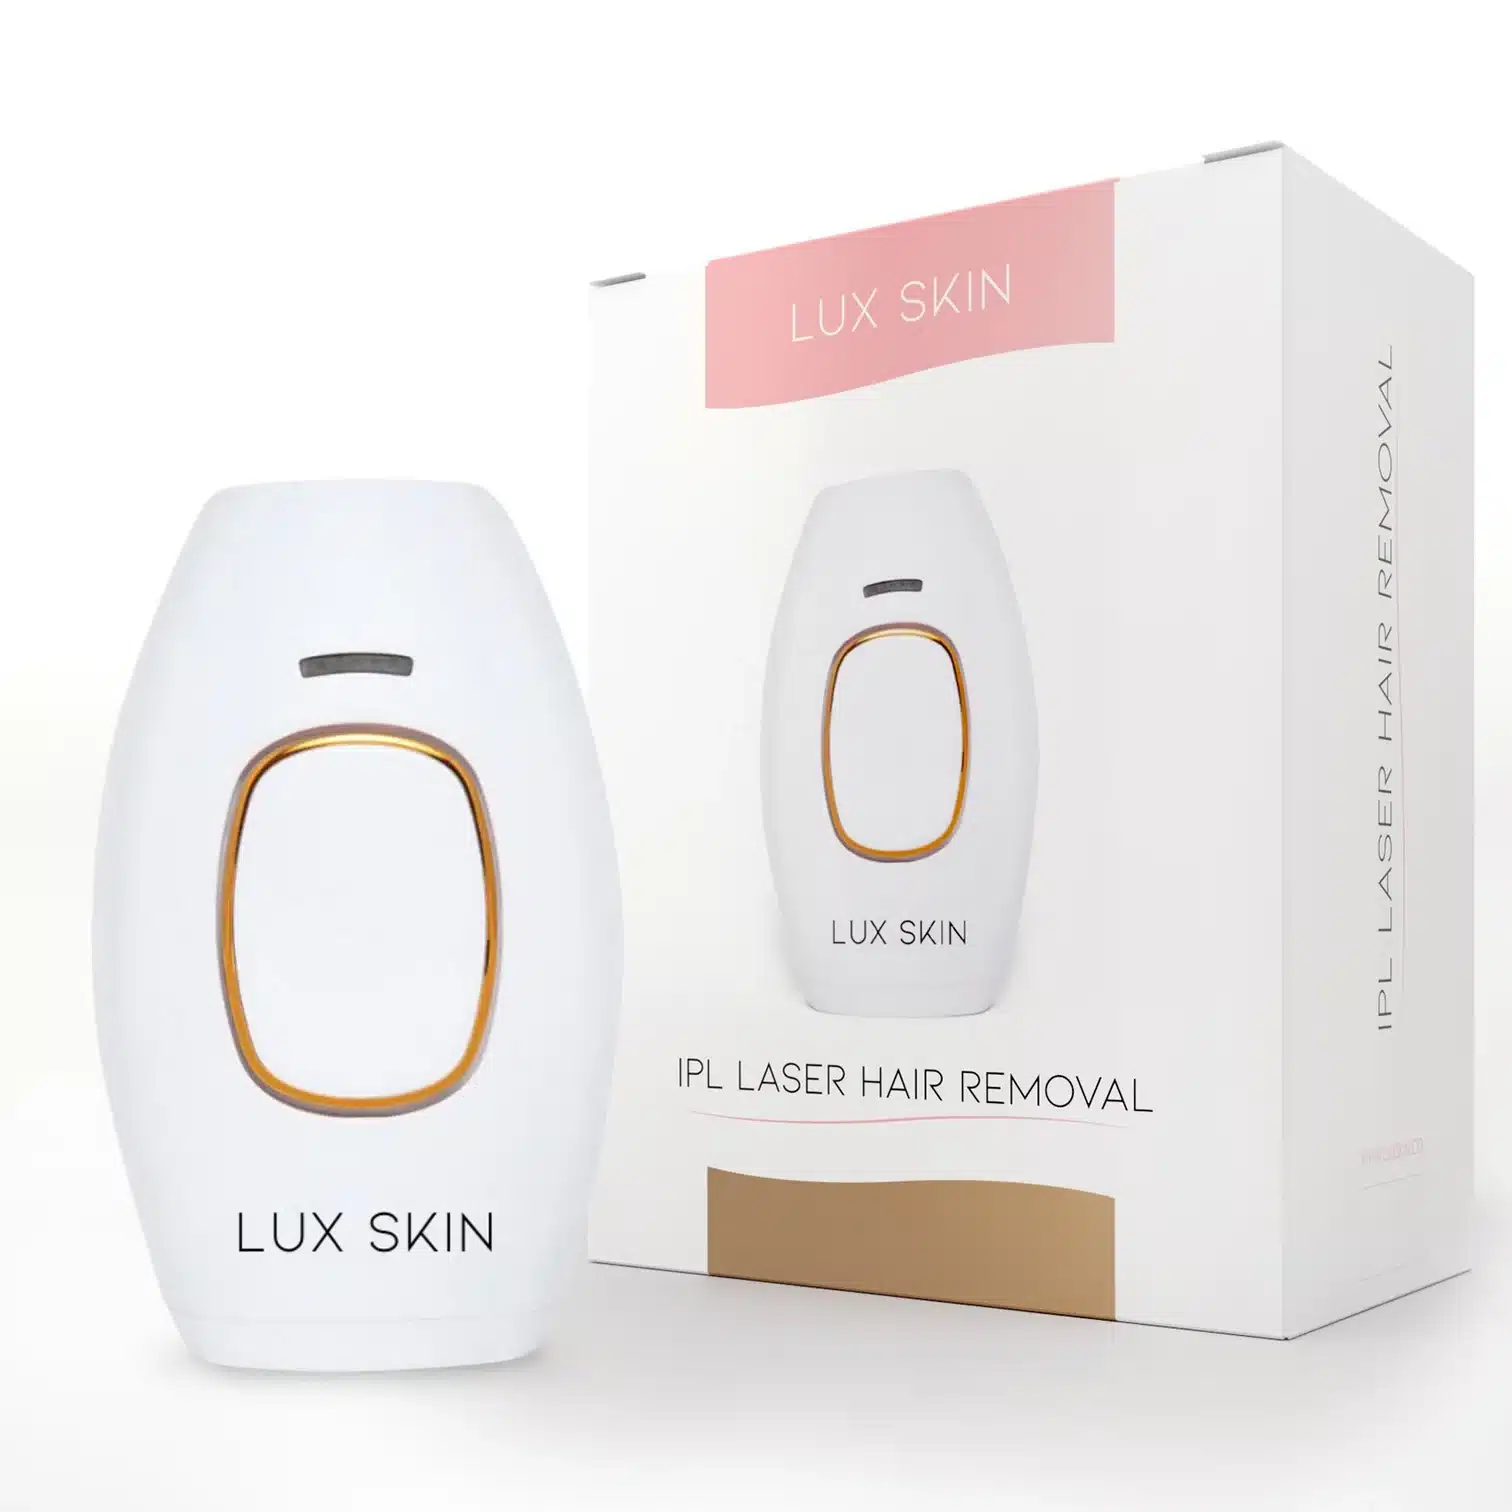 Lux Skin Laser Hair Removal Review